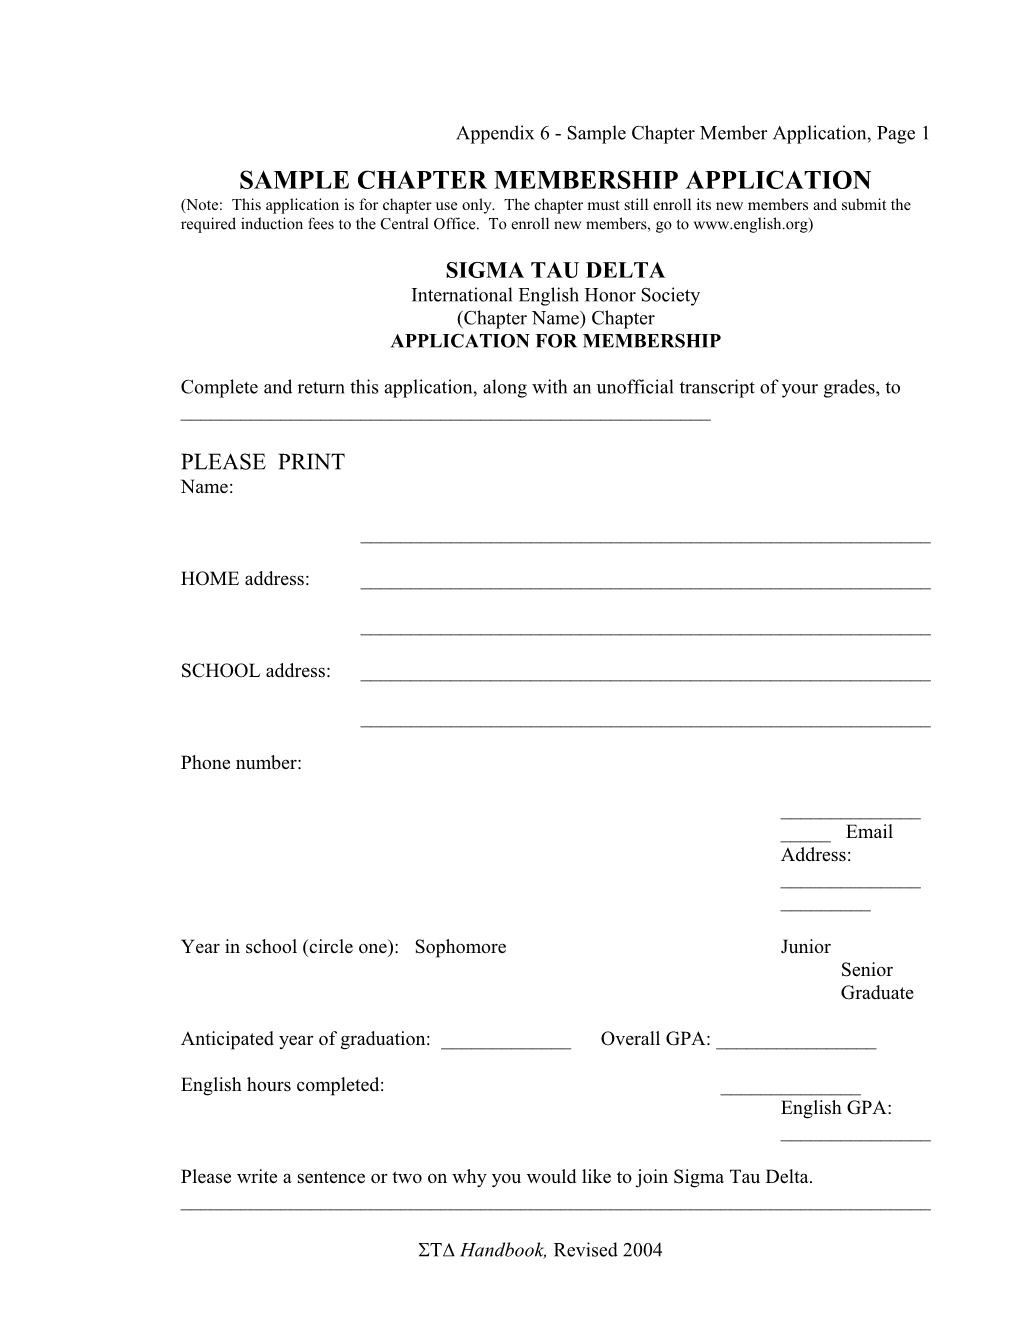 Sample - Chapter Membership Application - Local Use Only